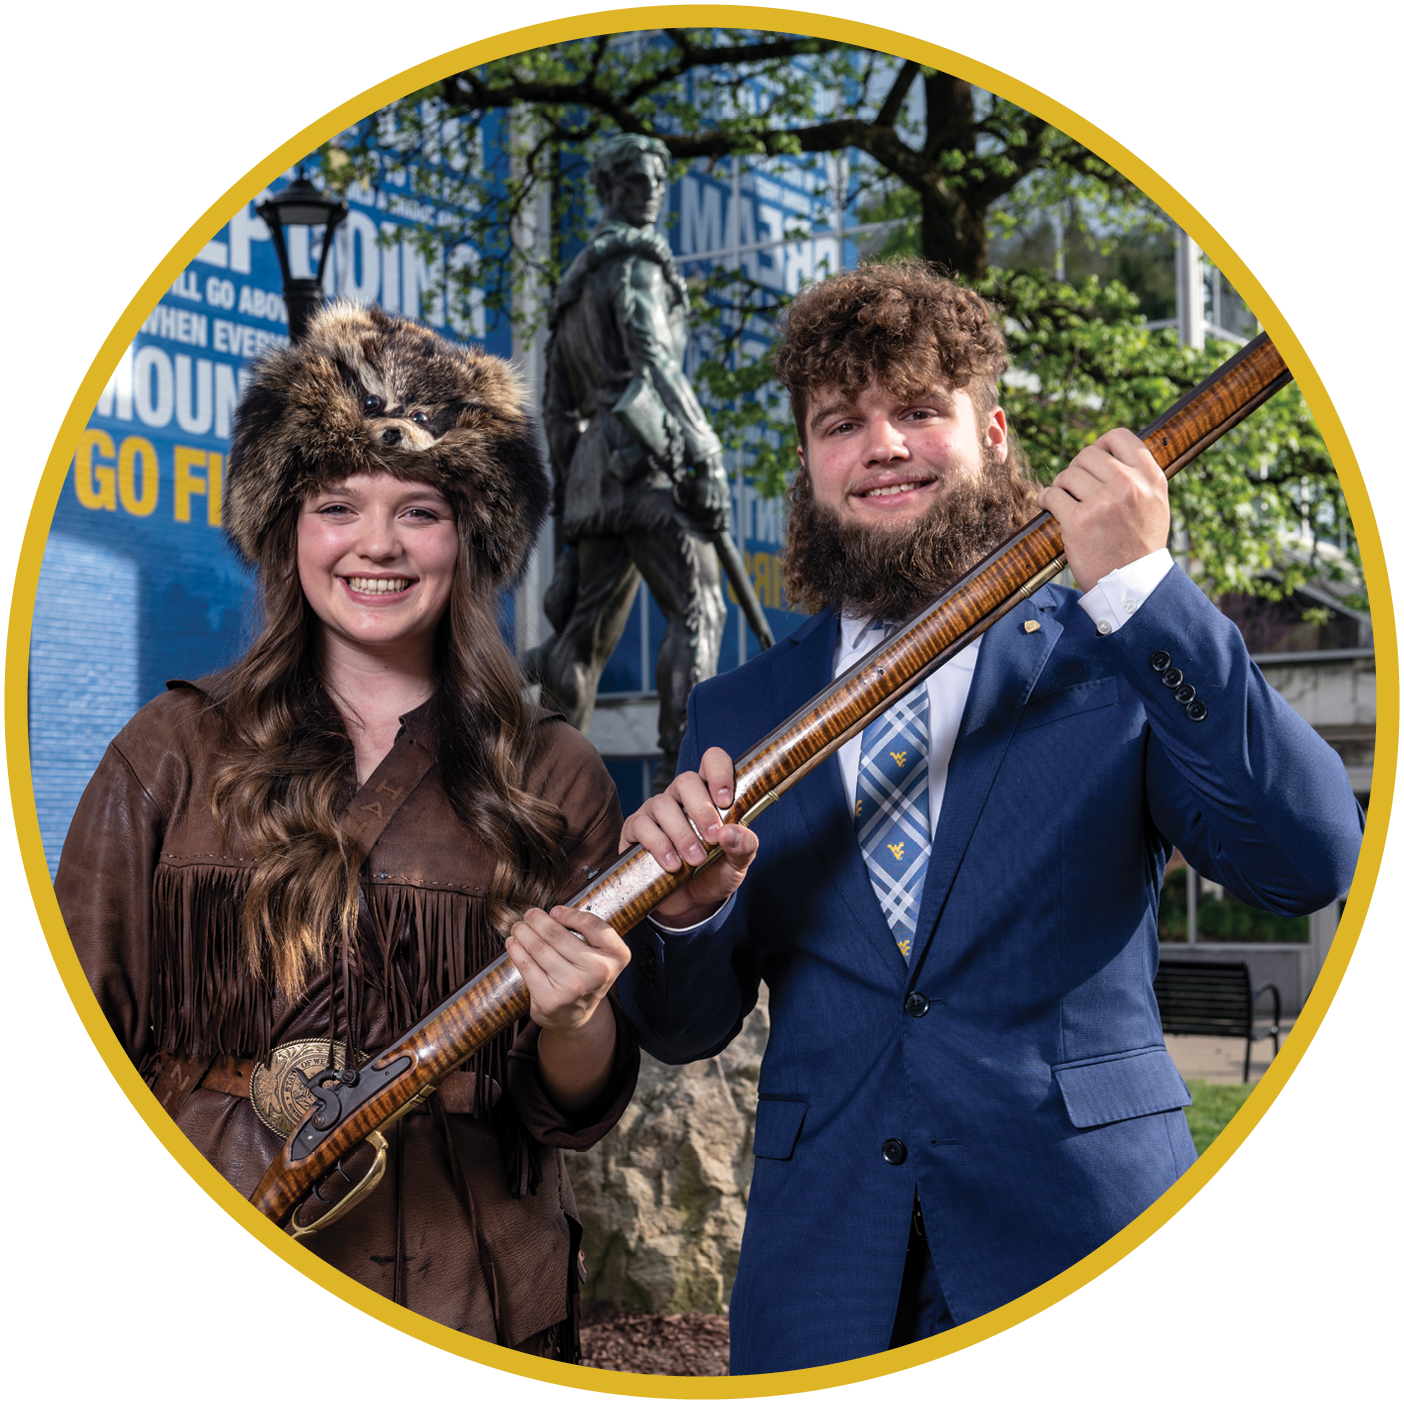 A female and male student dressed as mountaineers at West Virginia University